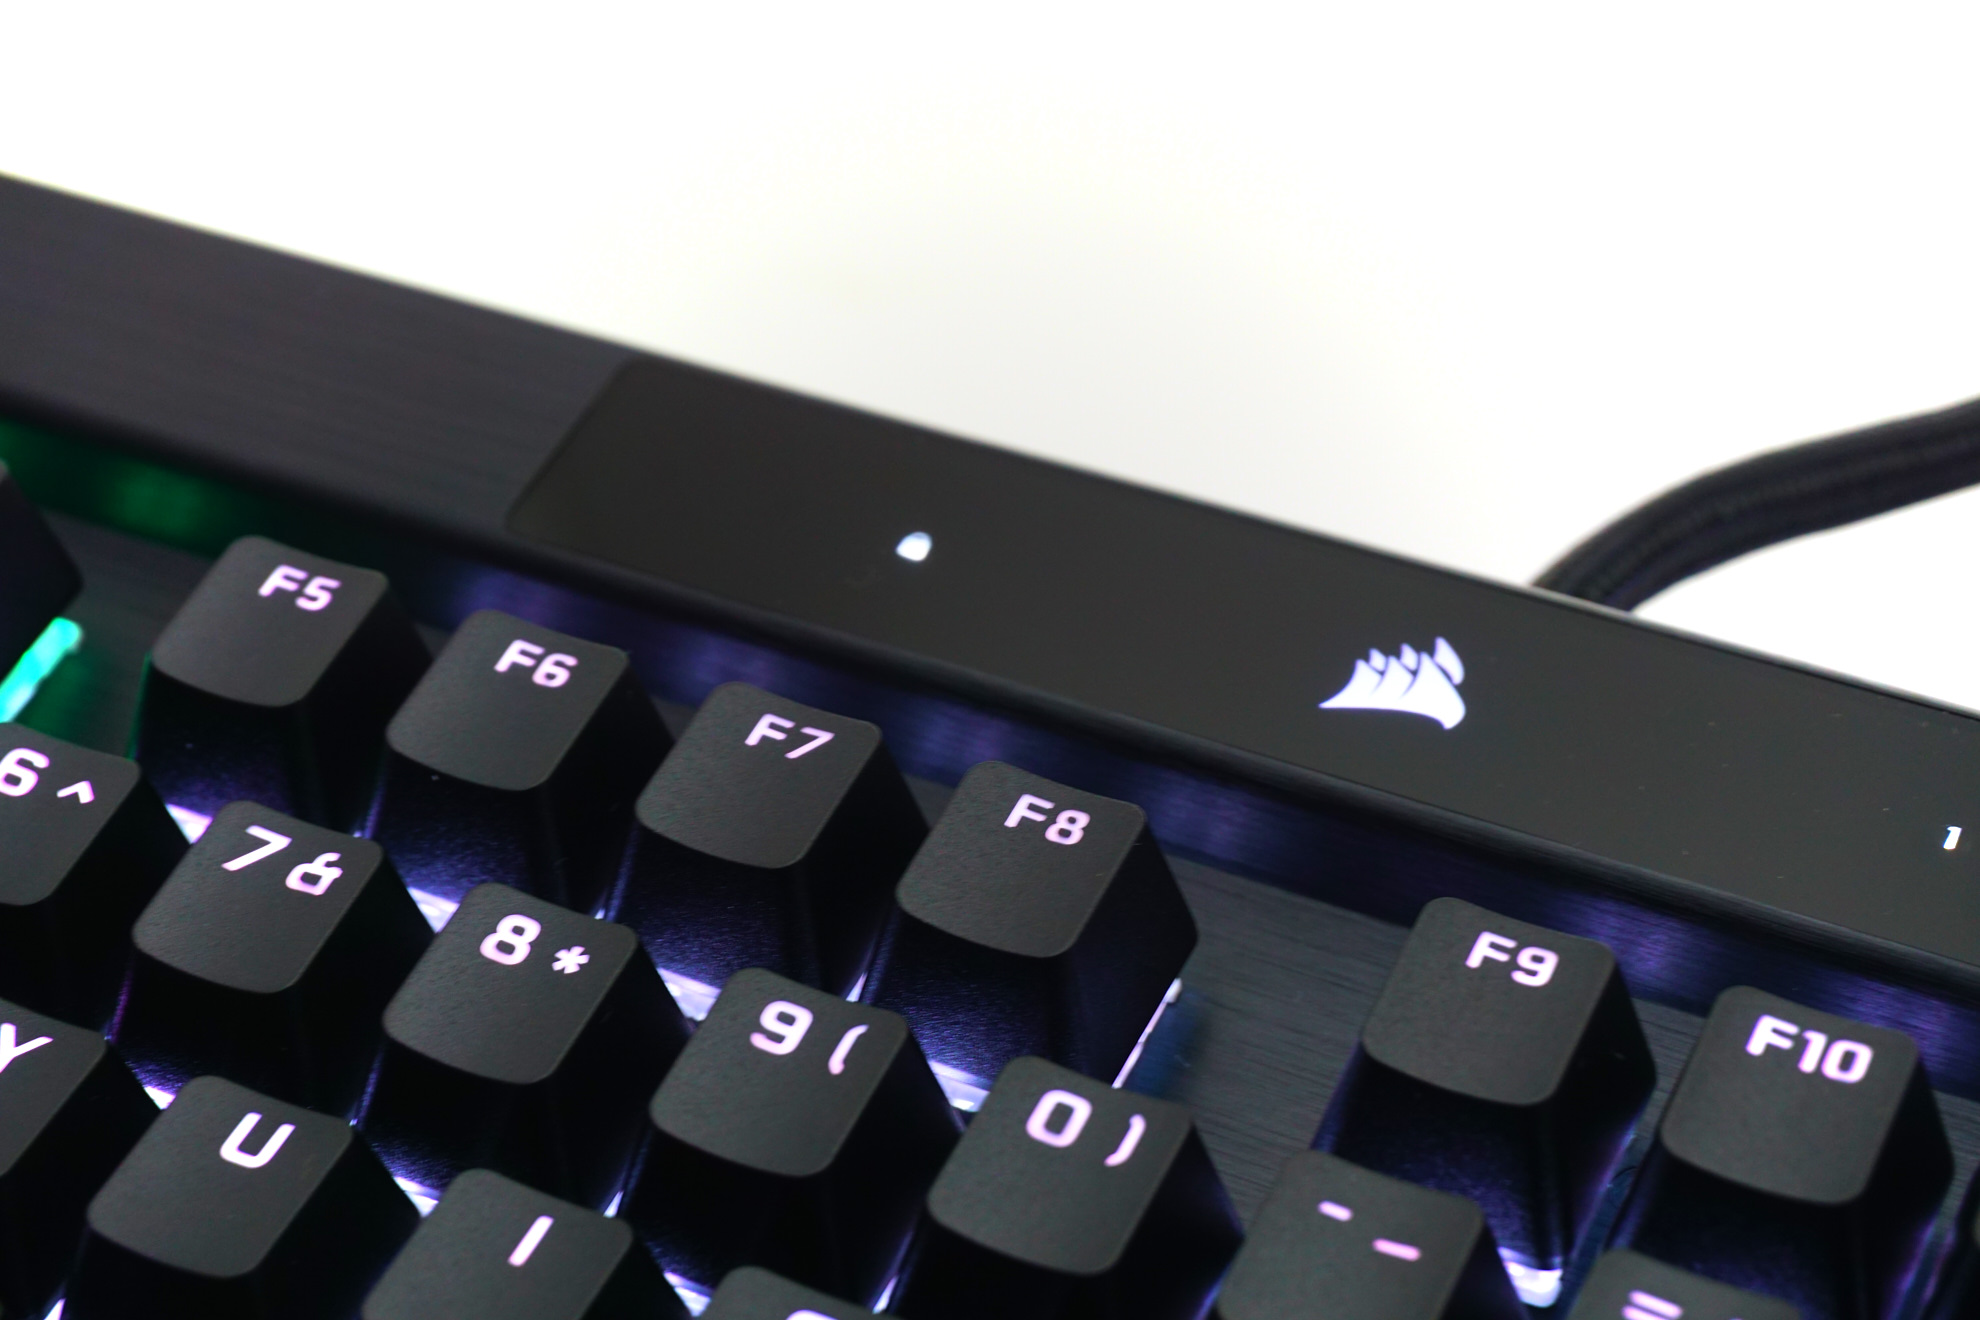 Corsair K100 RGB keyboard review: Speed is the name of the game